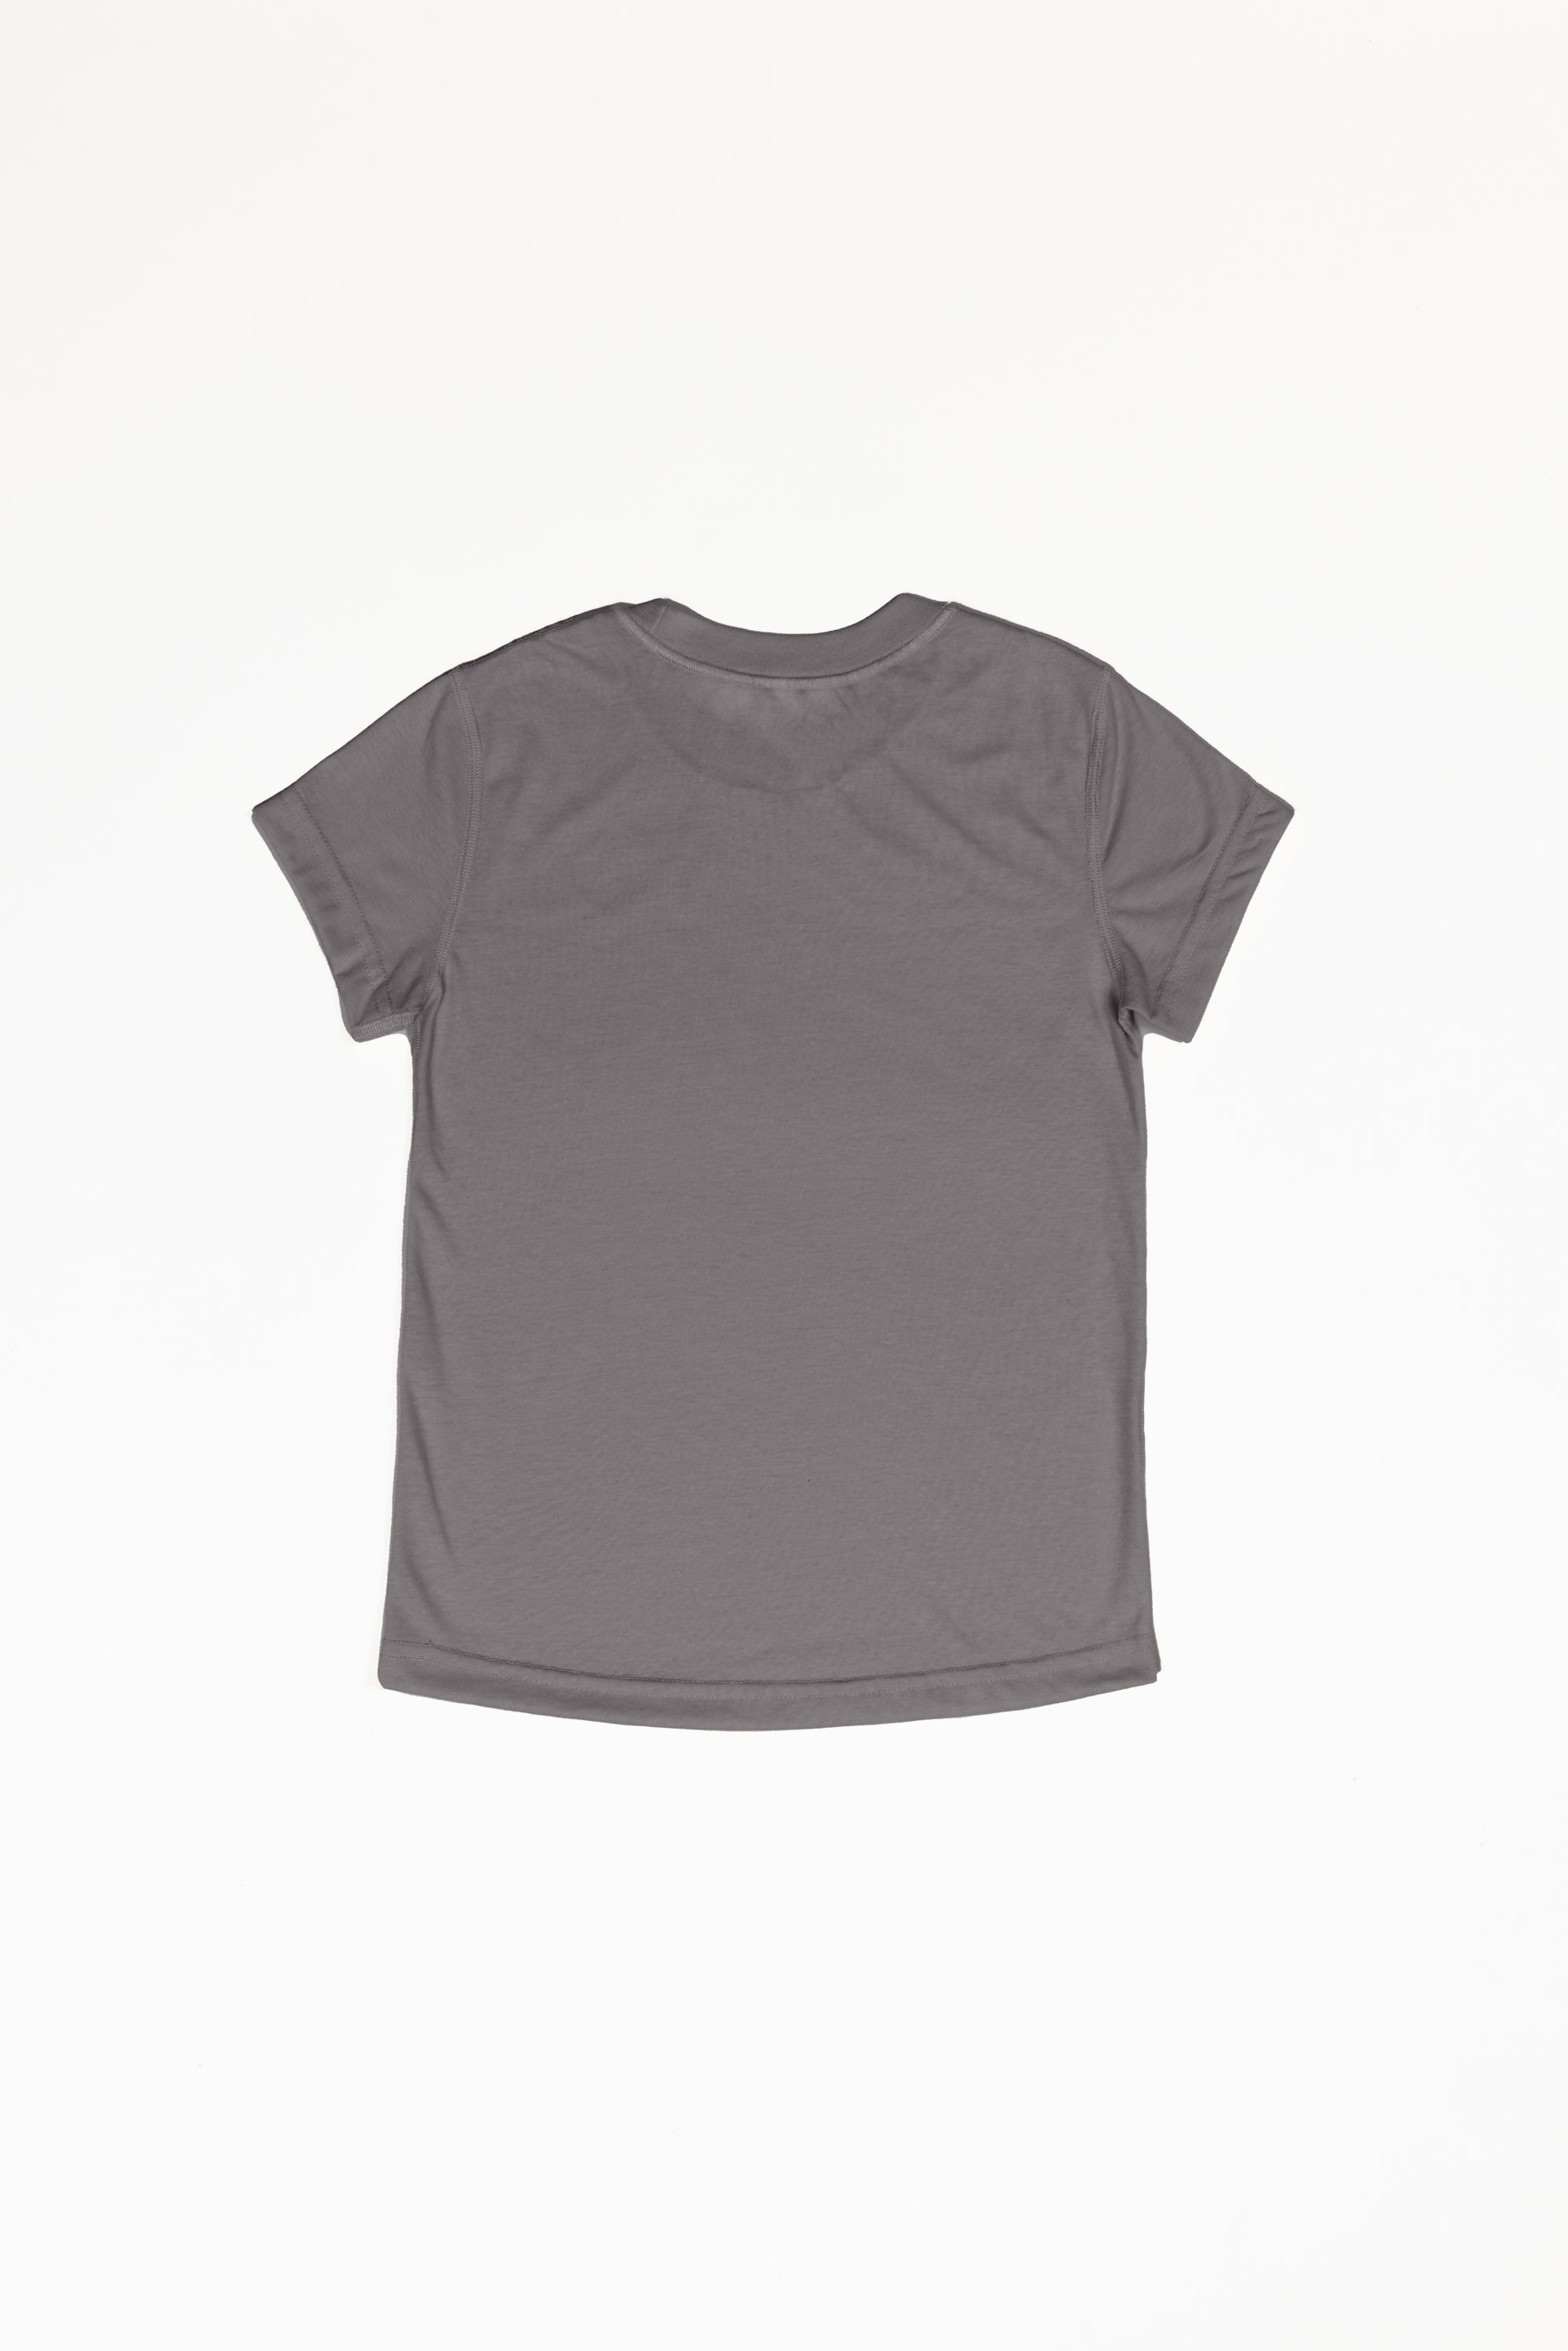 A charcoal grey small t-shirt with a white background. It is a basic t-shirt with a crew neck.